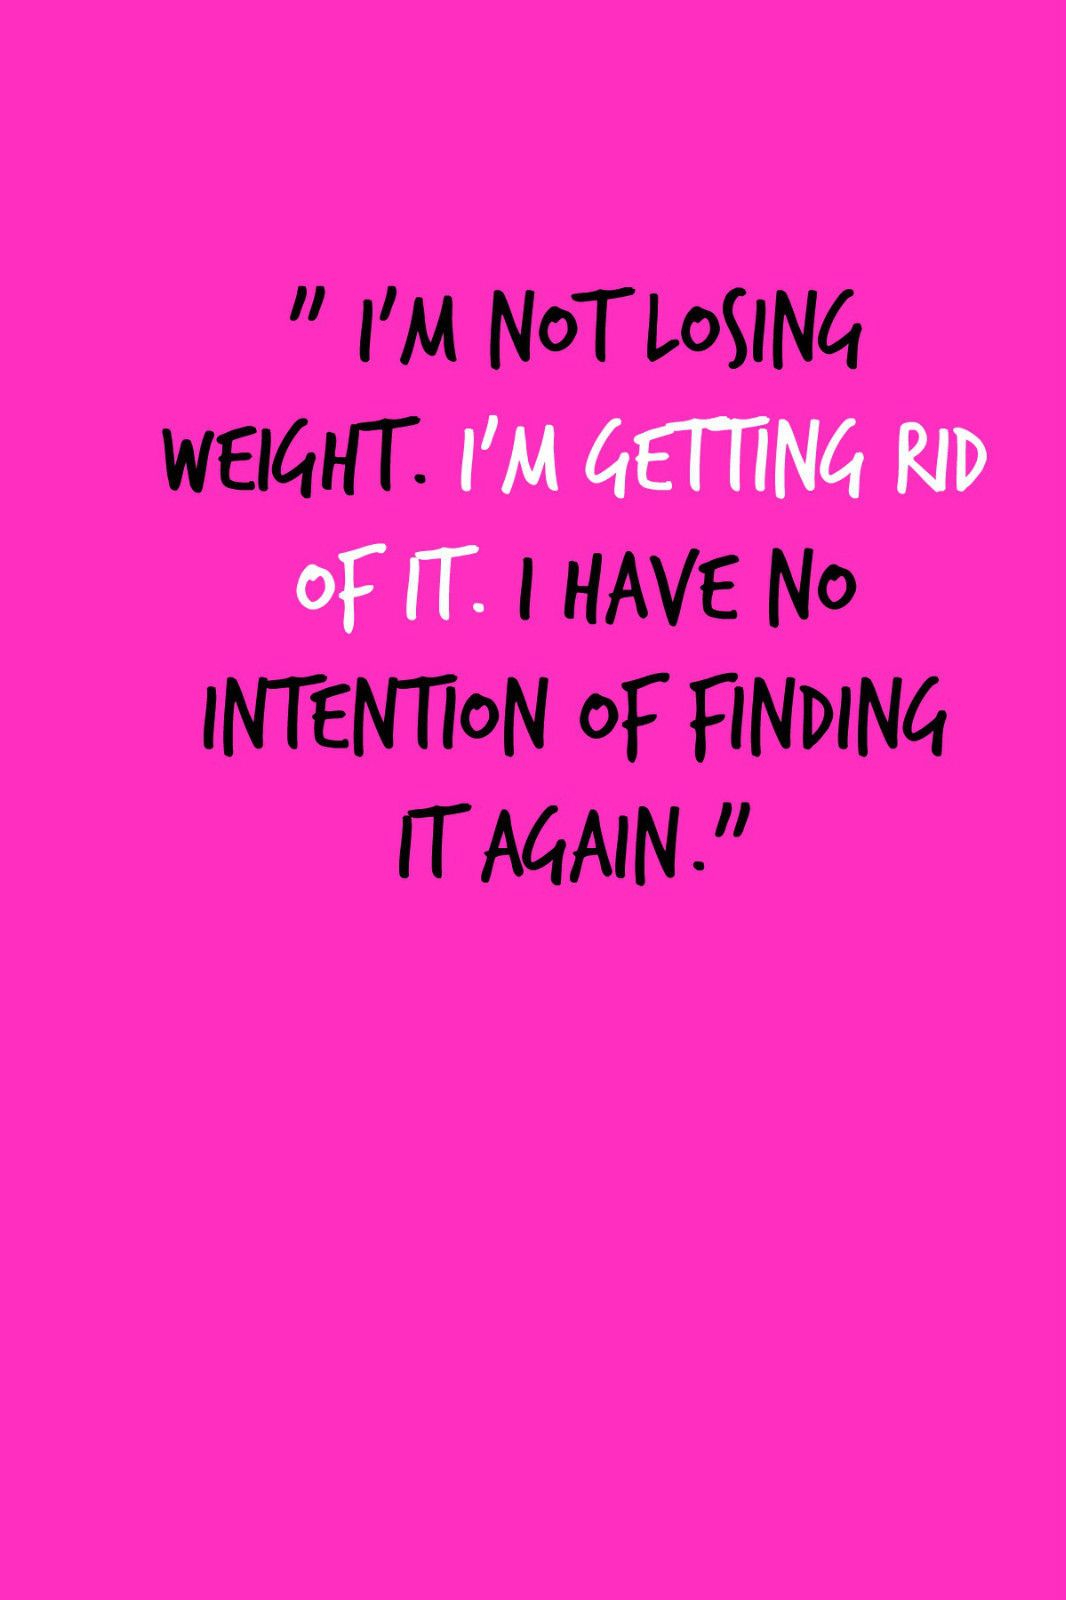 im not losing weight. i'm getting rid of it. i have no intention of finding it again.